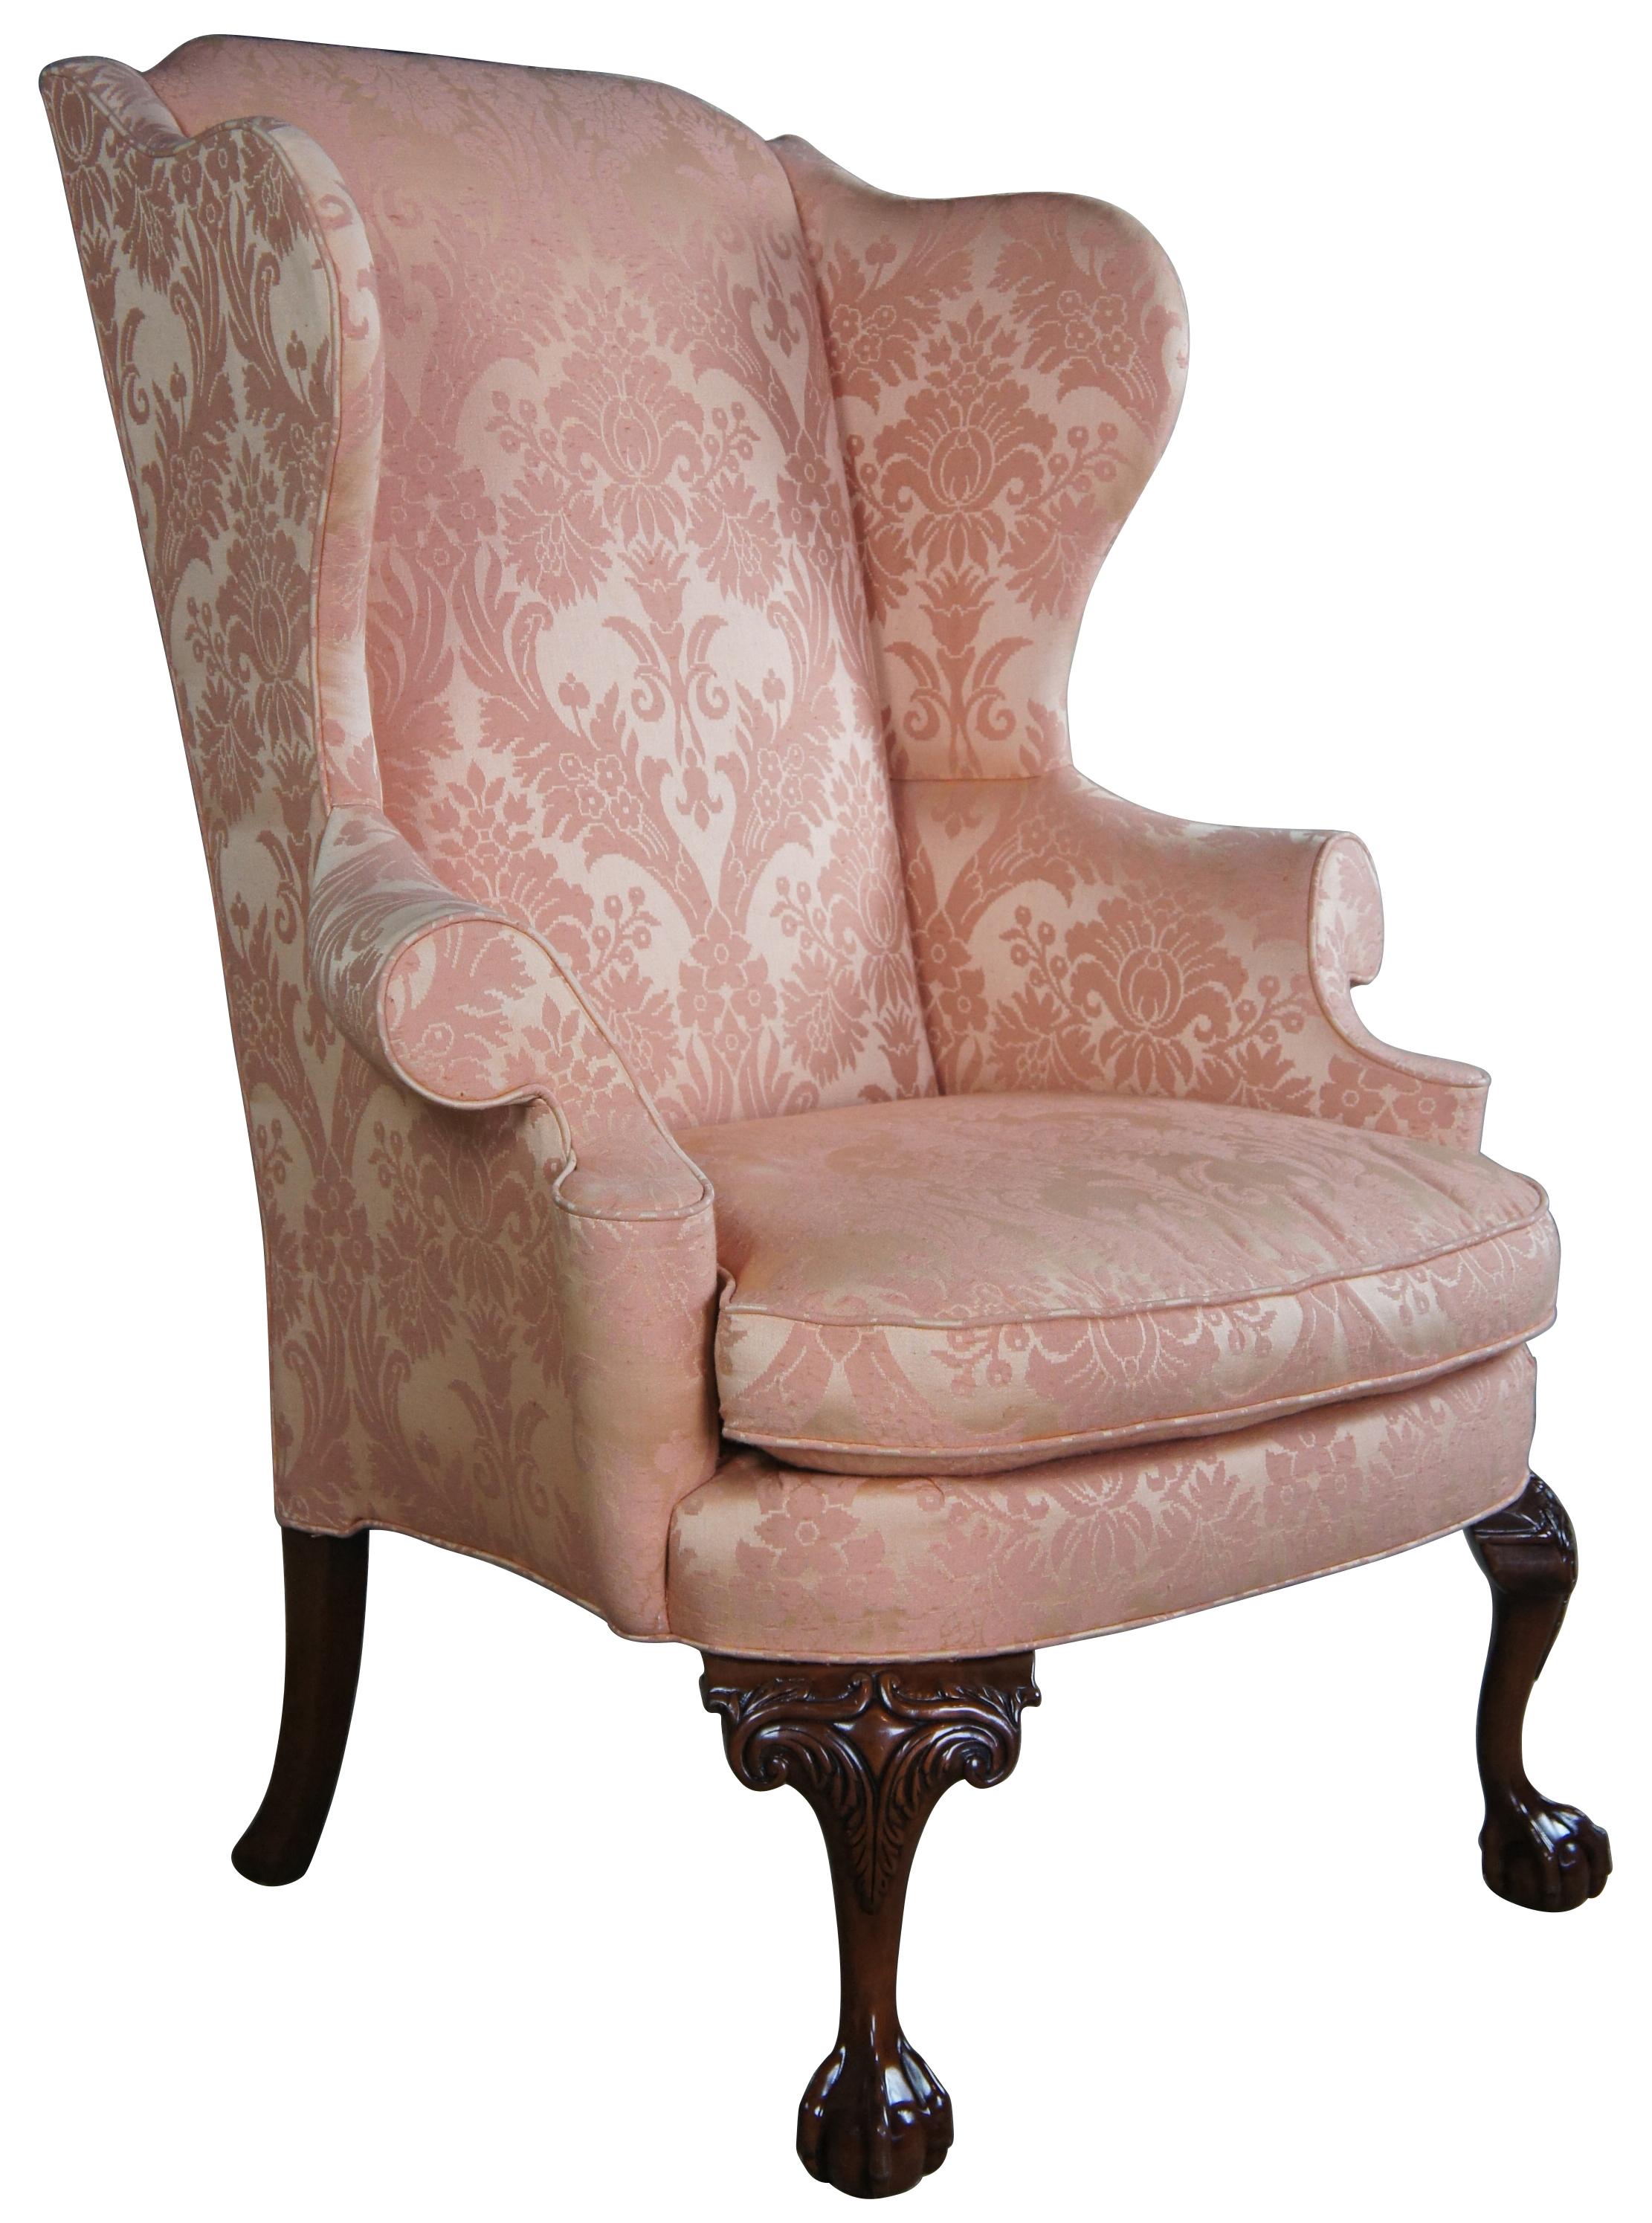 Southwood (Hickory, North Carolina) wing back chair. Made from mahogany frame with carved front Ball & Claw feet and square splayed legs at the back. Upholstered in a pink damask fabric.
   